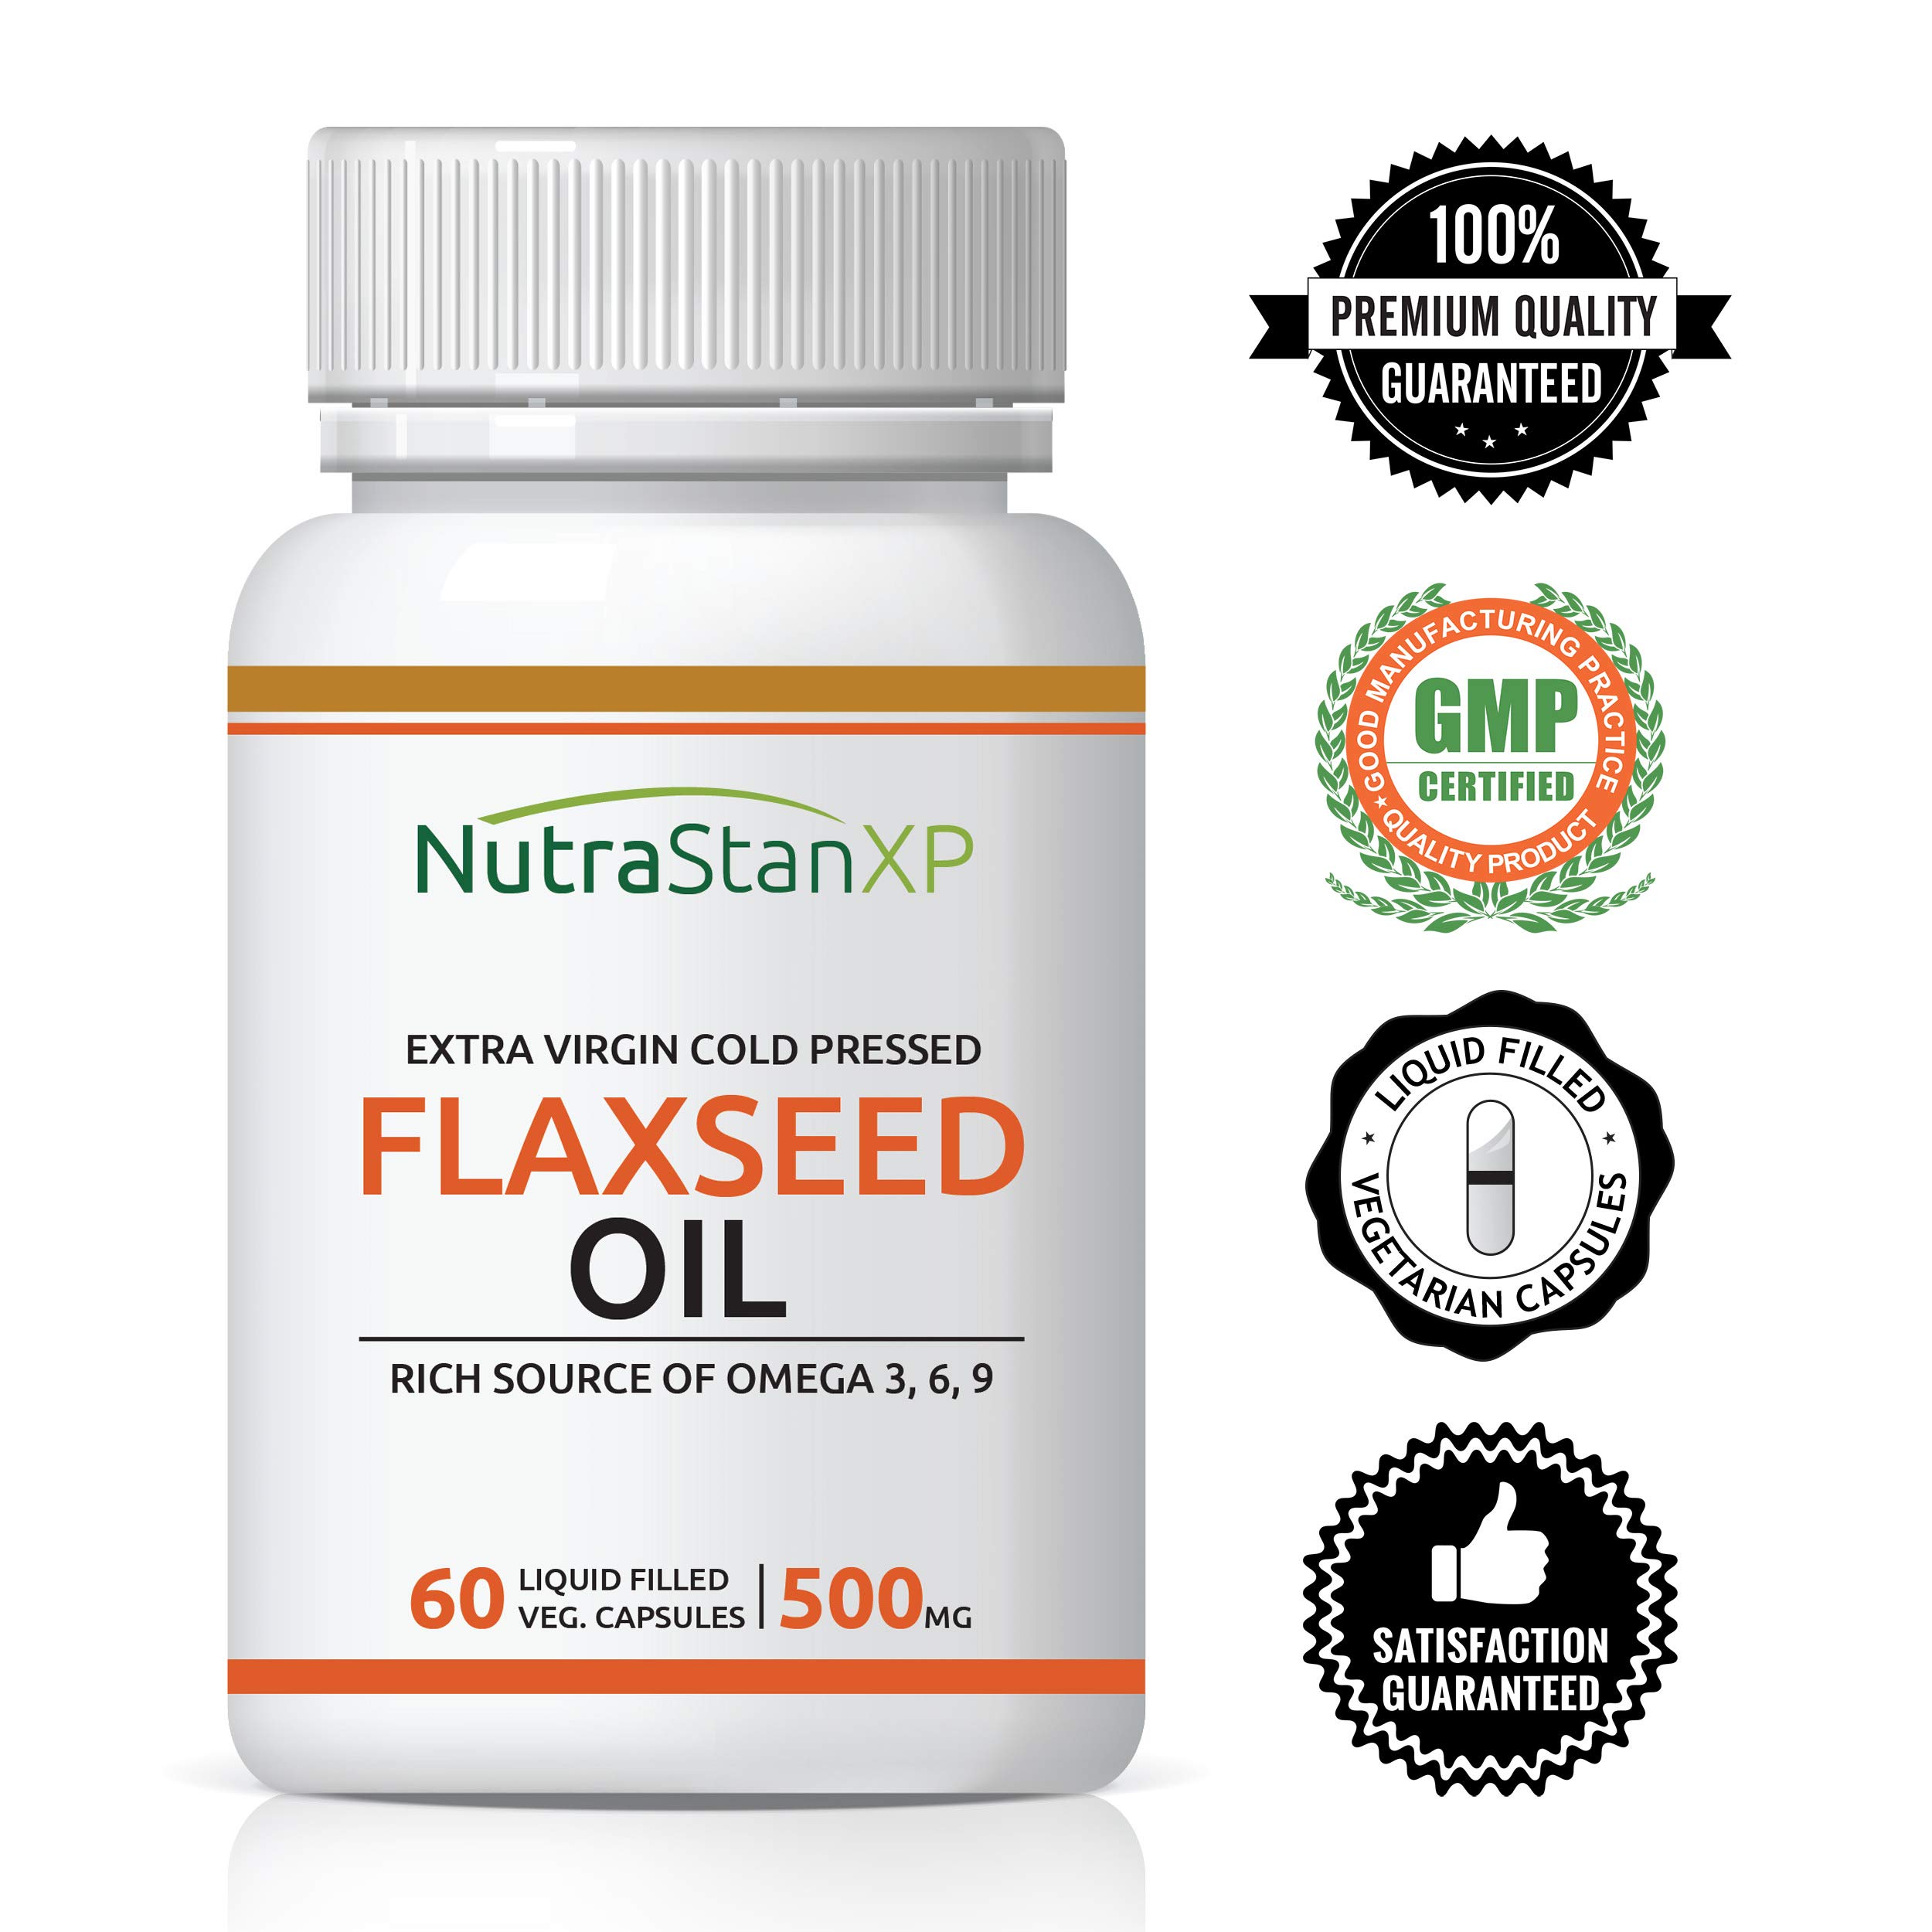 NutrastanXP Flaxseed Oil Veg Omega 3 6 9 Supplement, Extra Virgin Cold Pressed 500 mg - 60 Vegetarian Capsules